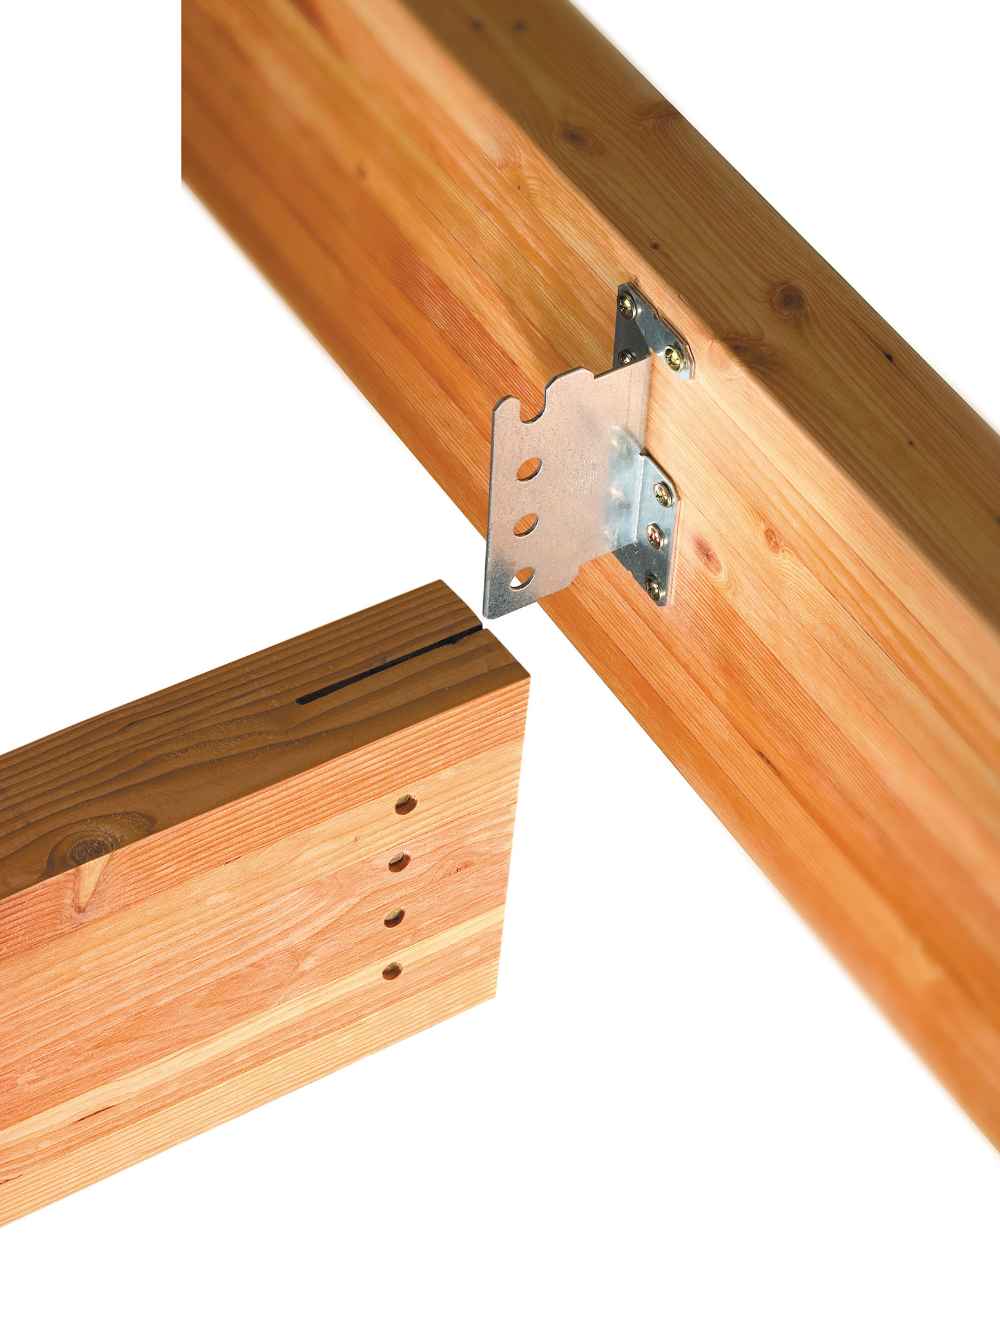 Simpson CJT6ZS Concealed Joist Tie w Short Pins ZMAX Finish image 3 of 5